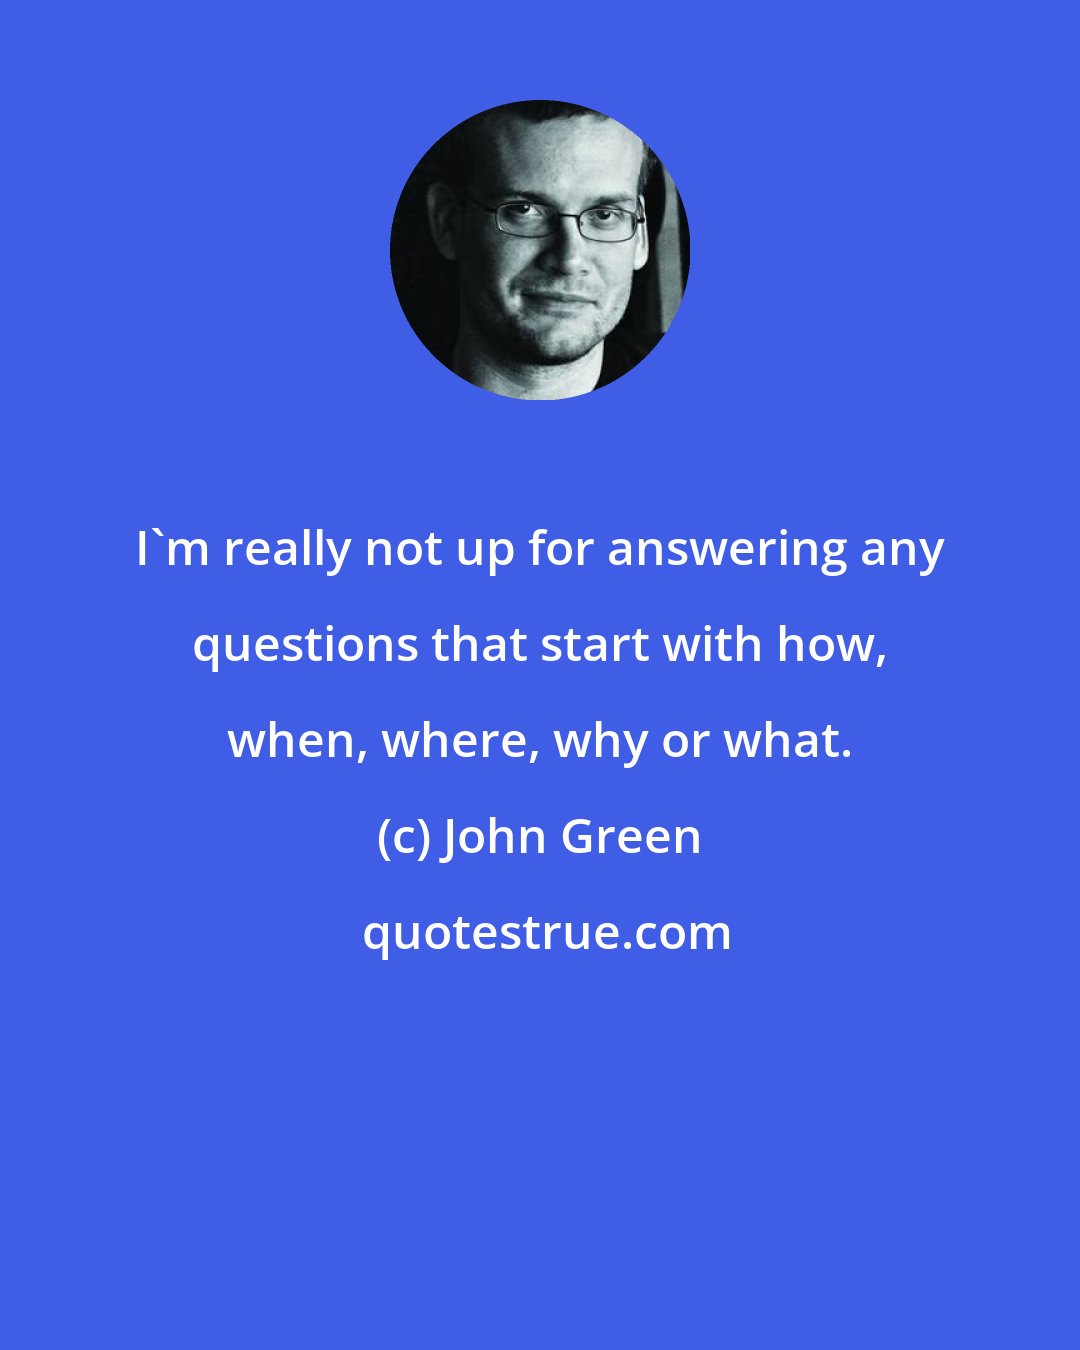 John Green: I'm really not up for answering any questions that start with how, when, where, why or what.